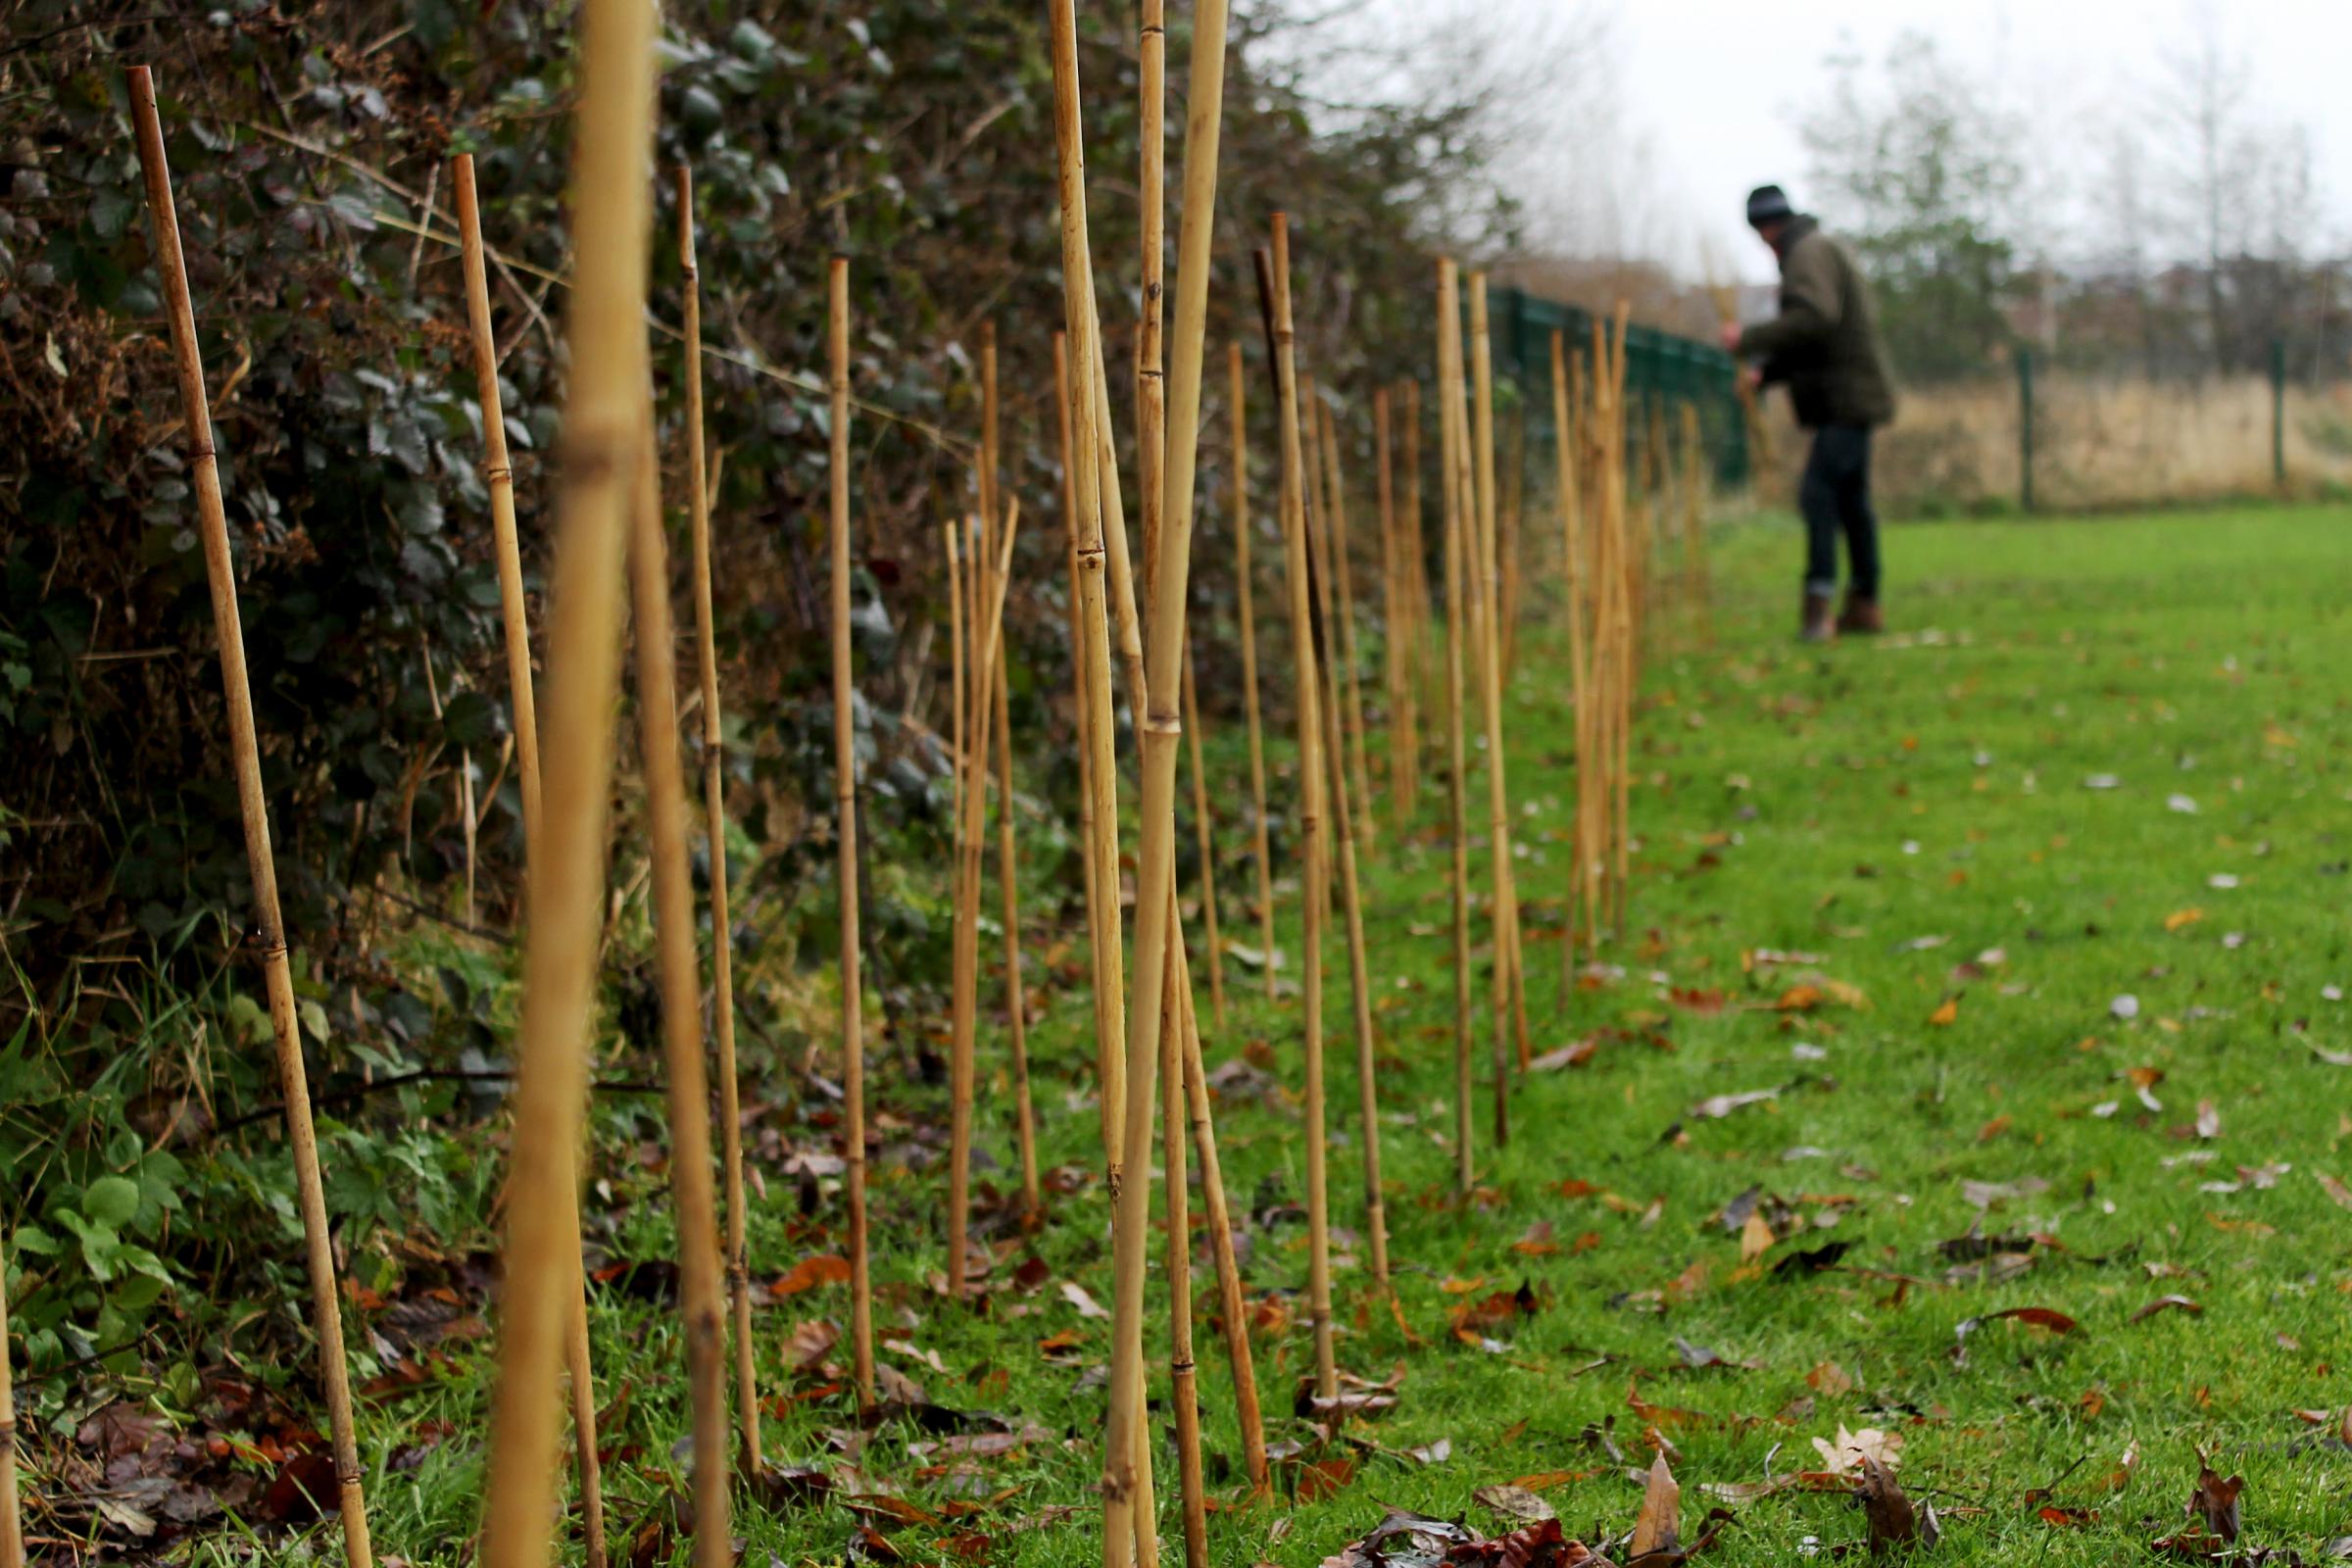 3,000 trees are being planted at Blackwell Meadows, Darlington